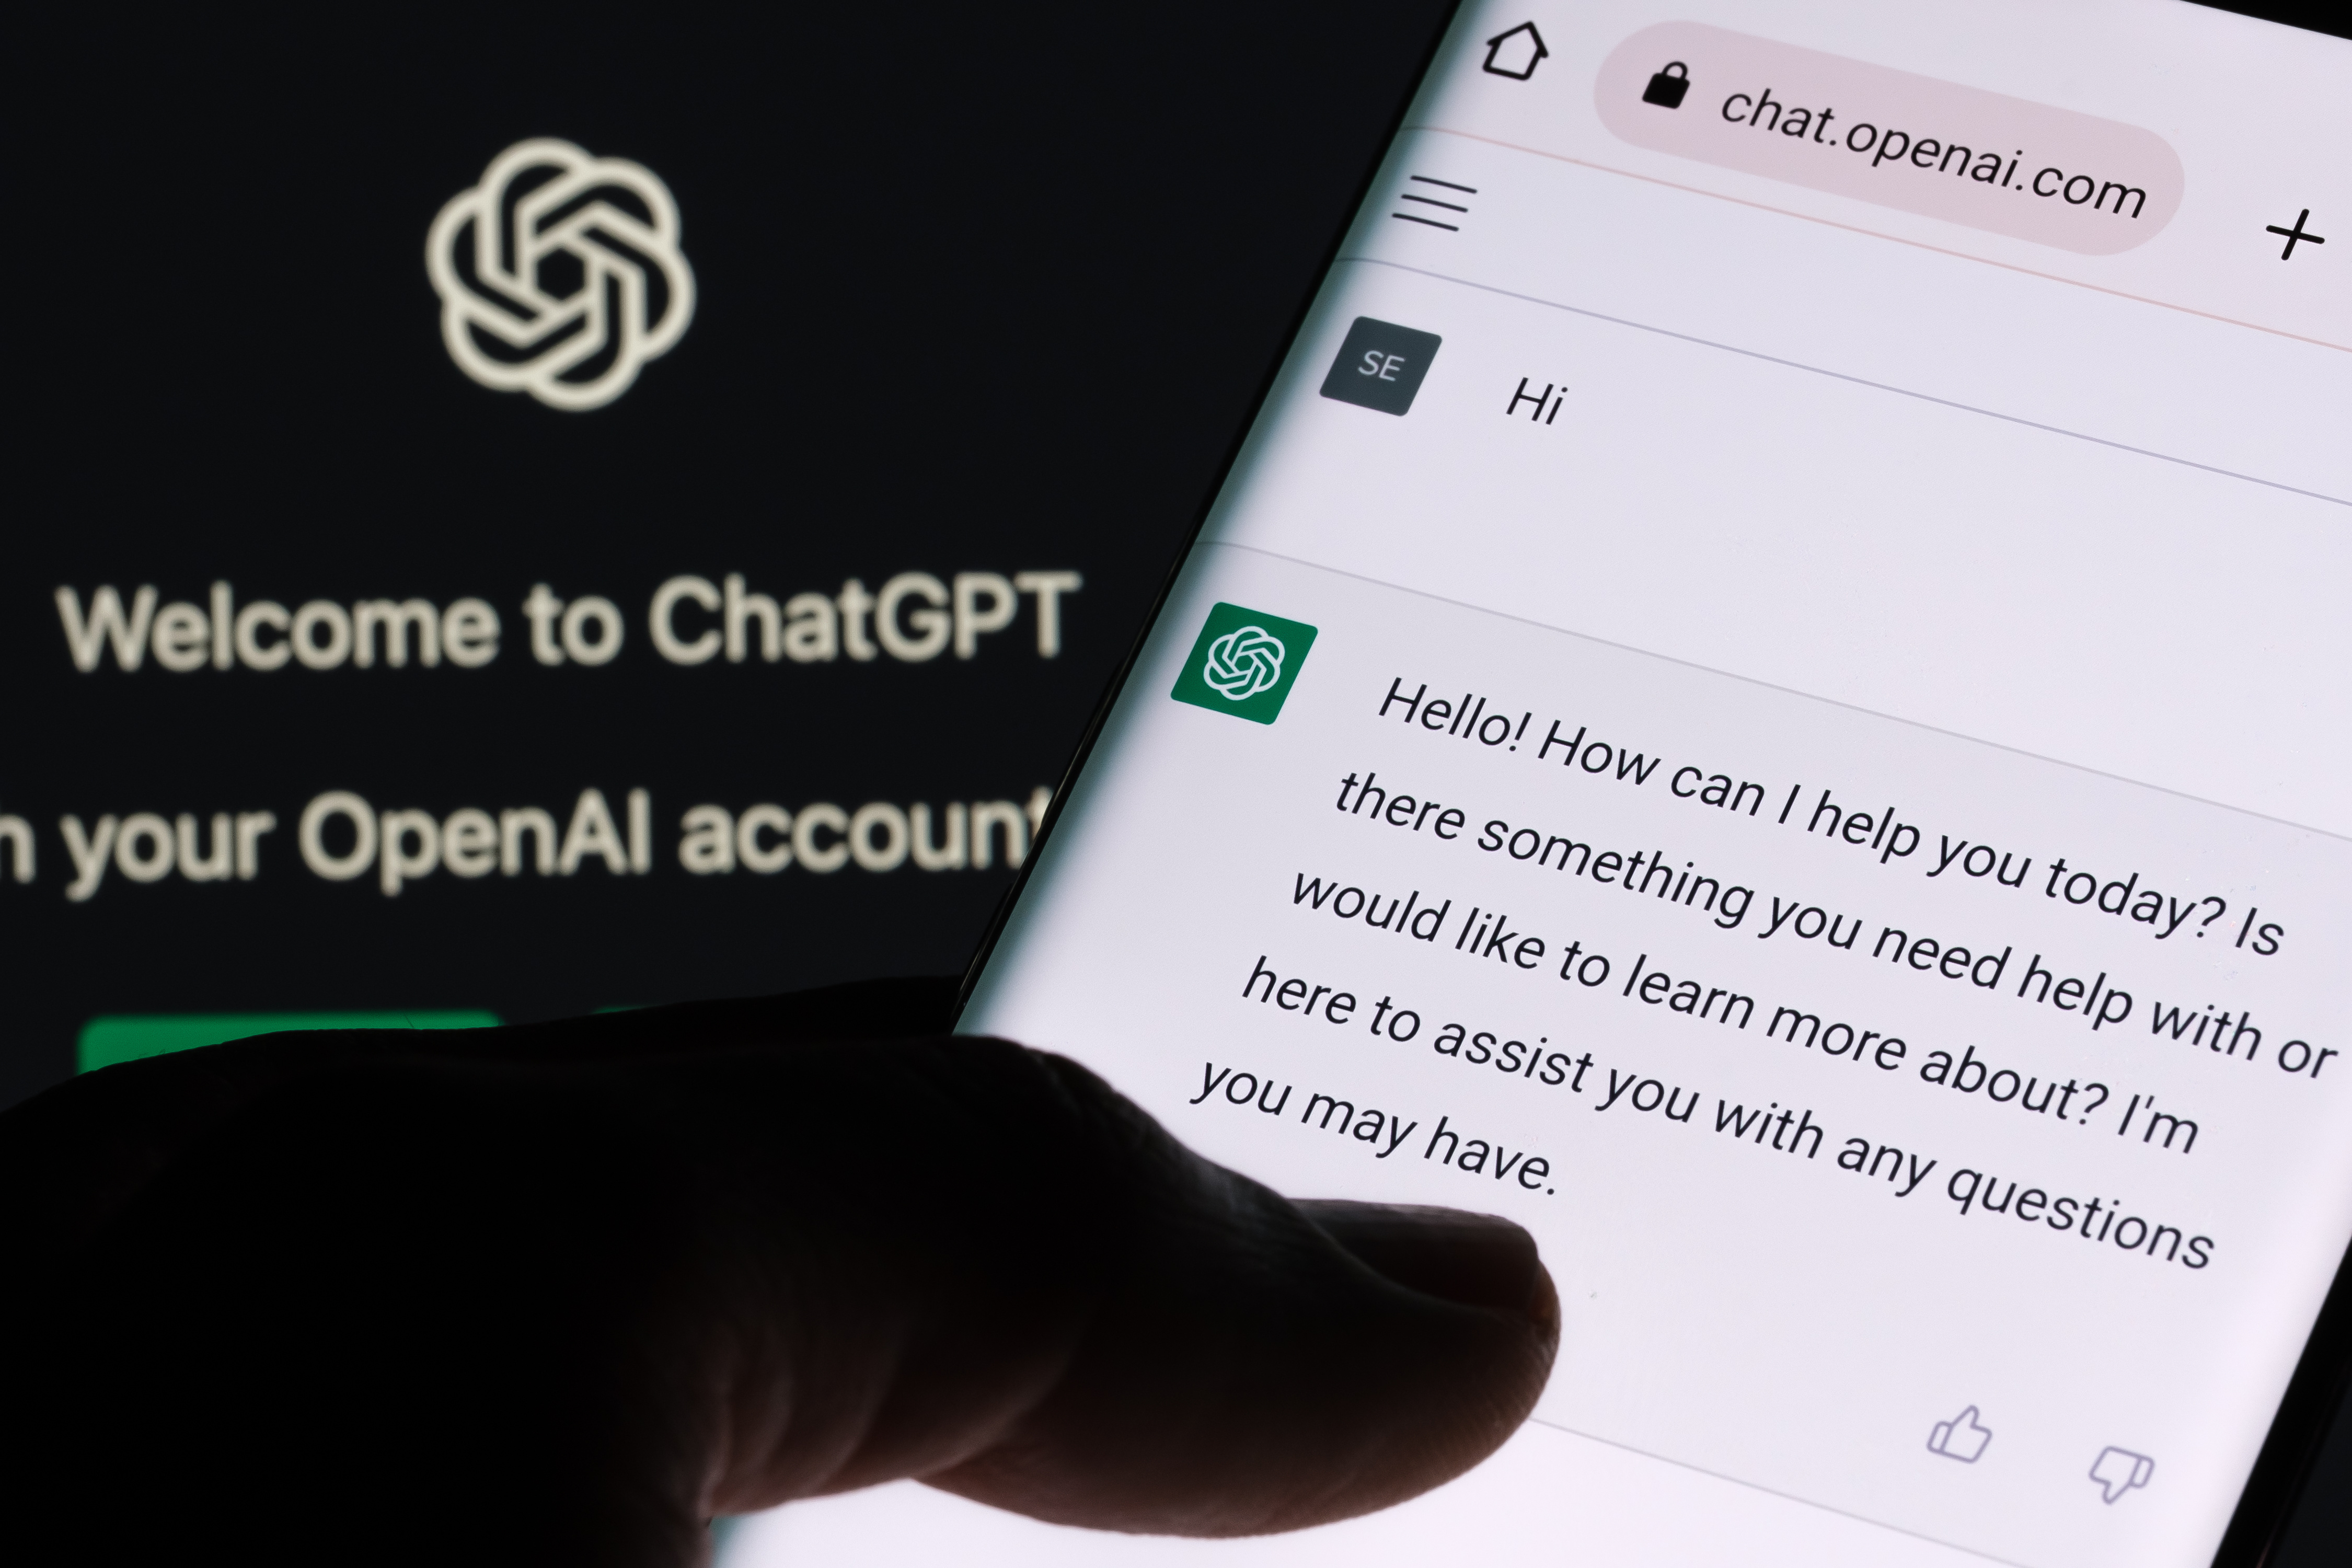 Background shows ChatGPT navigation menu; foreground shows Chat GPT response and human finger interacting with it.